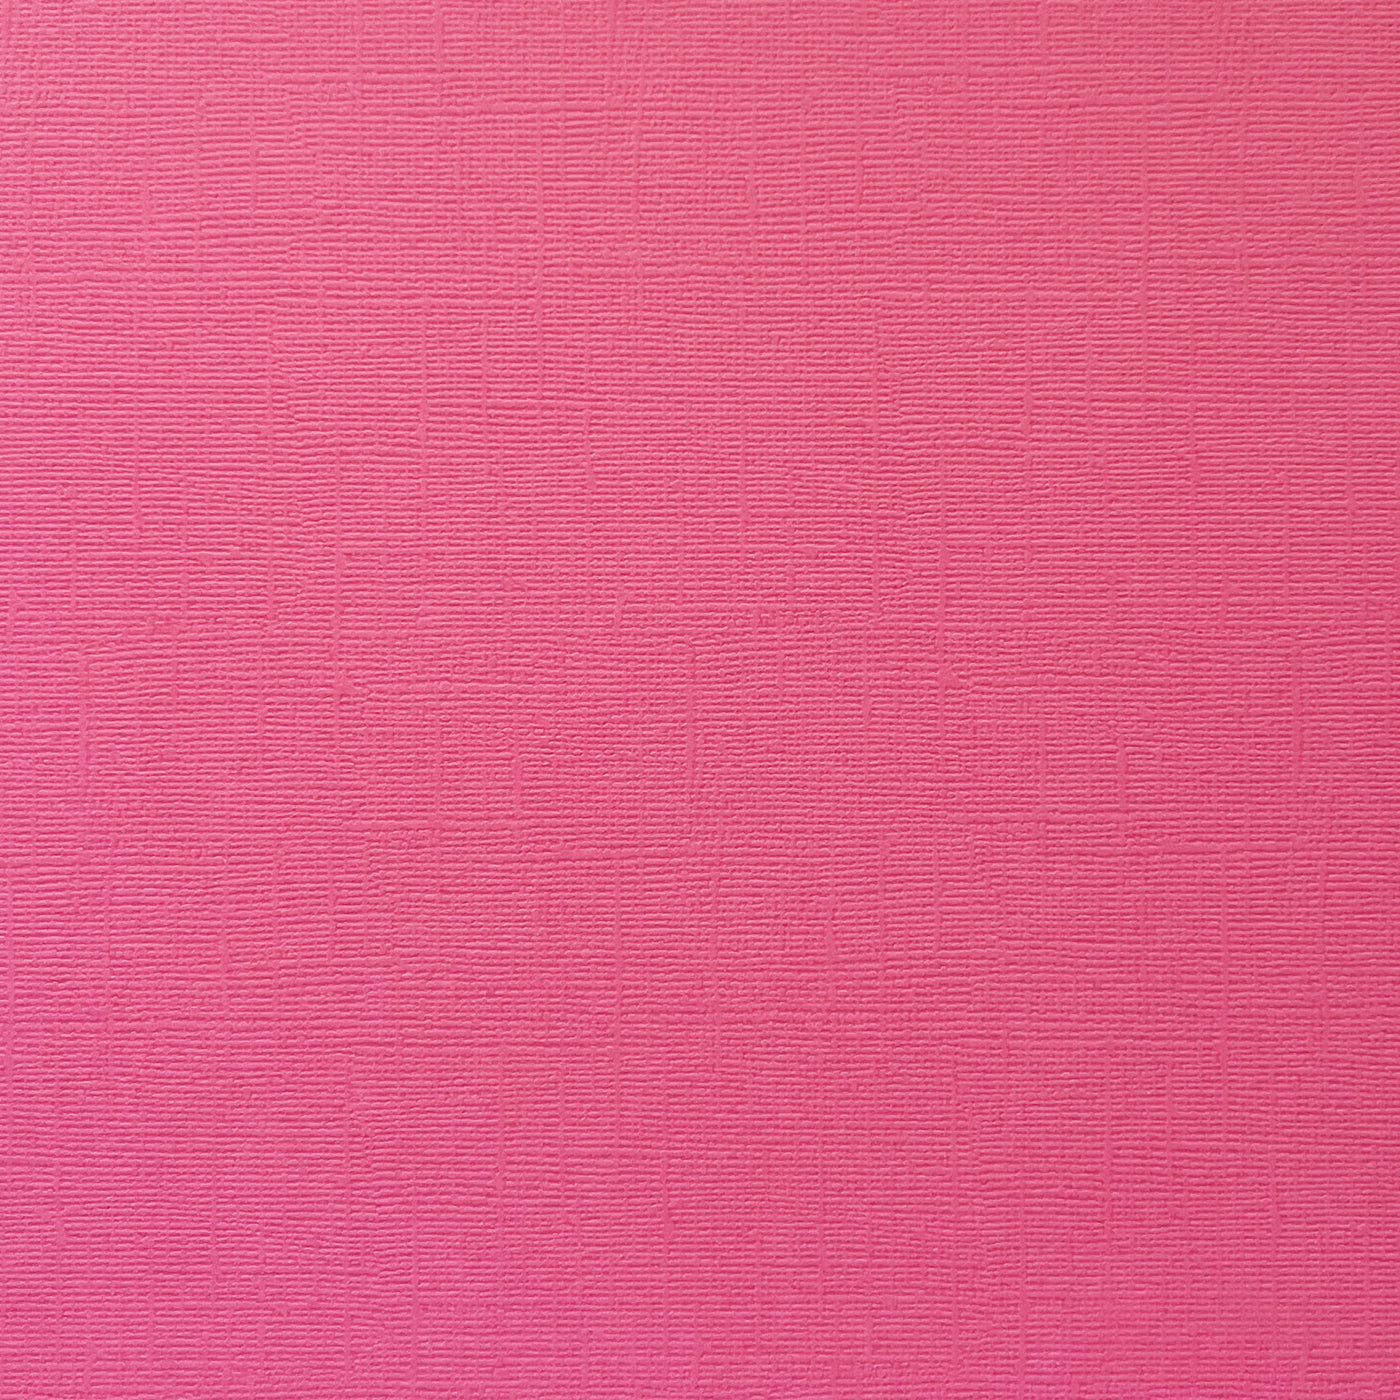 ROSE TOPAZ - Bright Pink Textured 12x12 Cardstock - Encore Paper